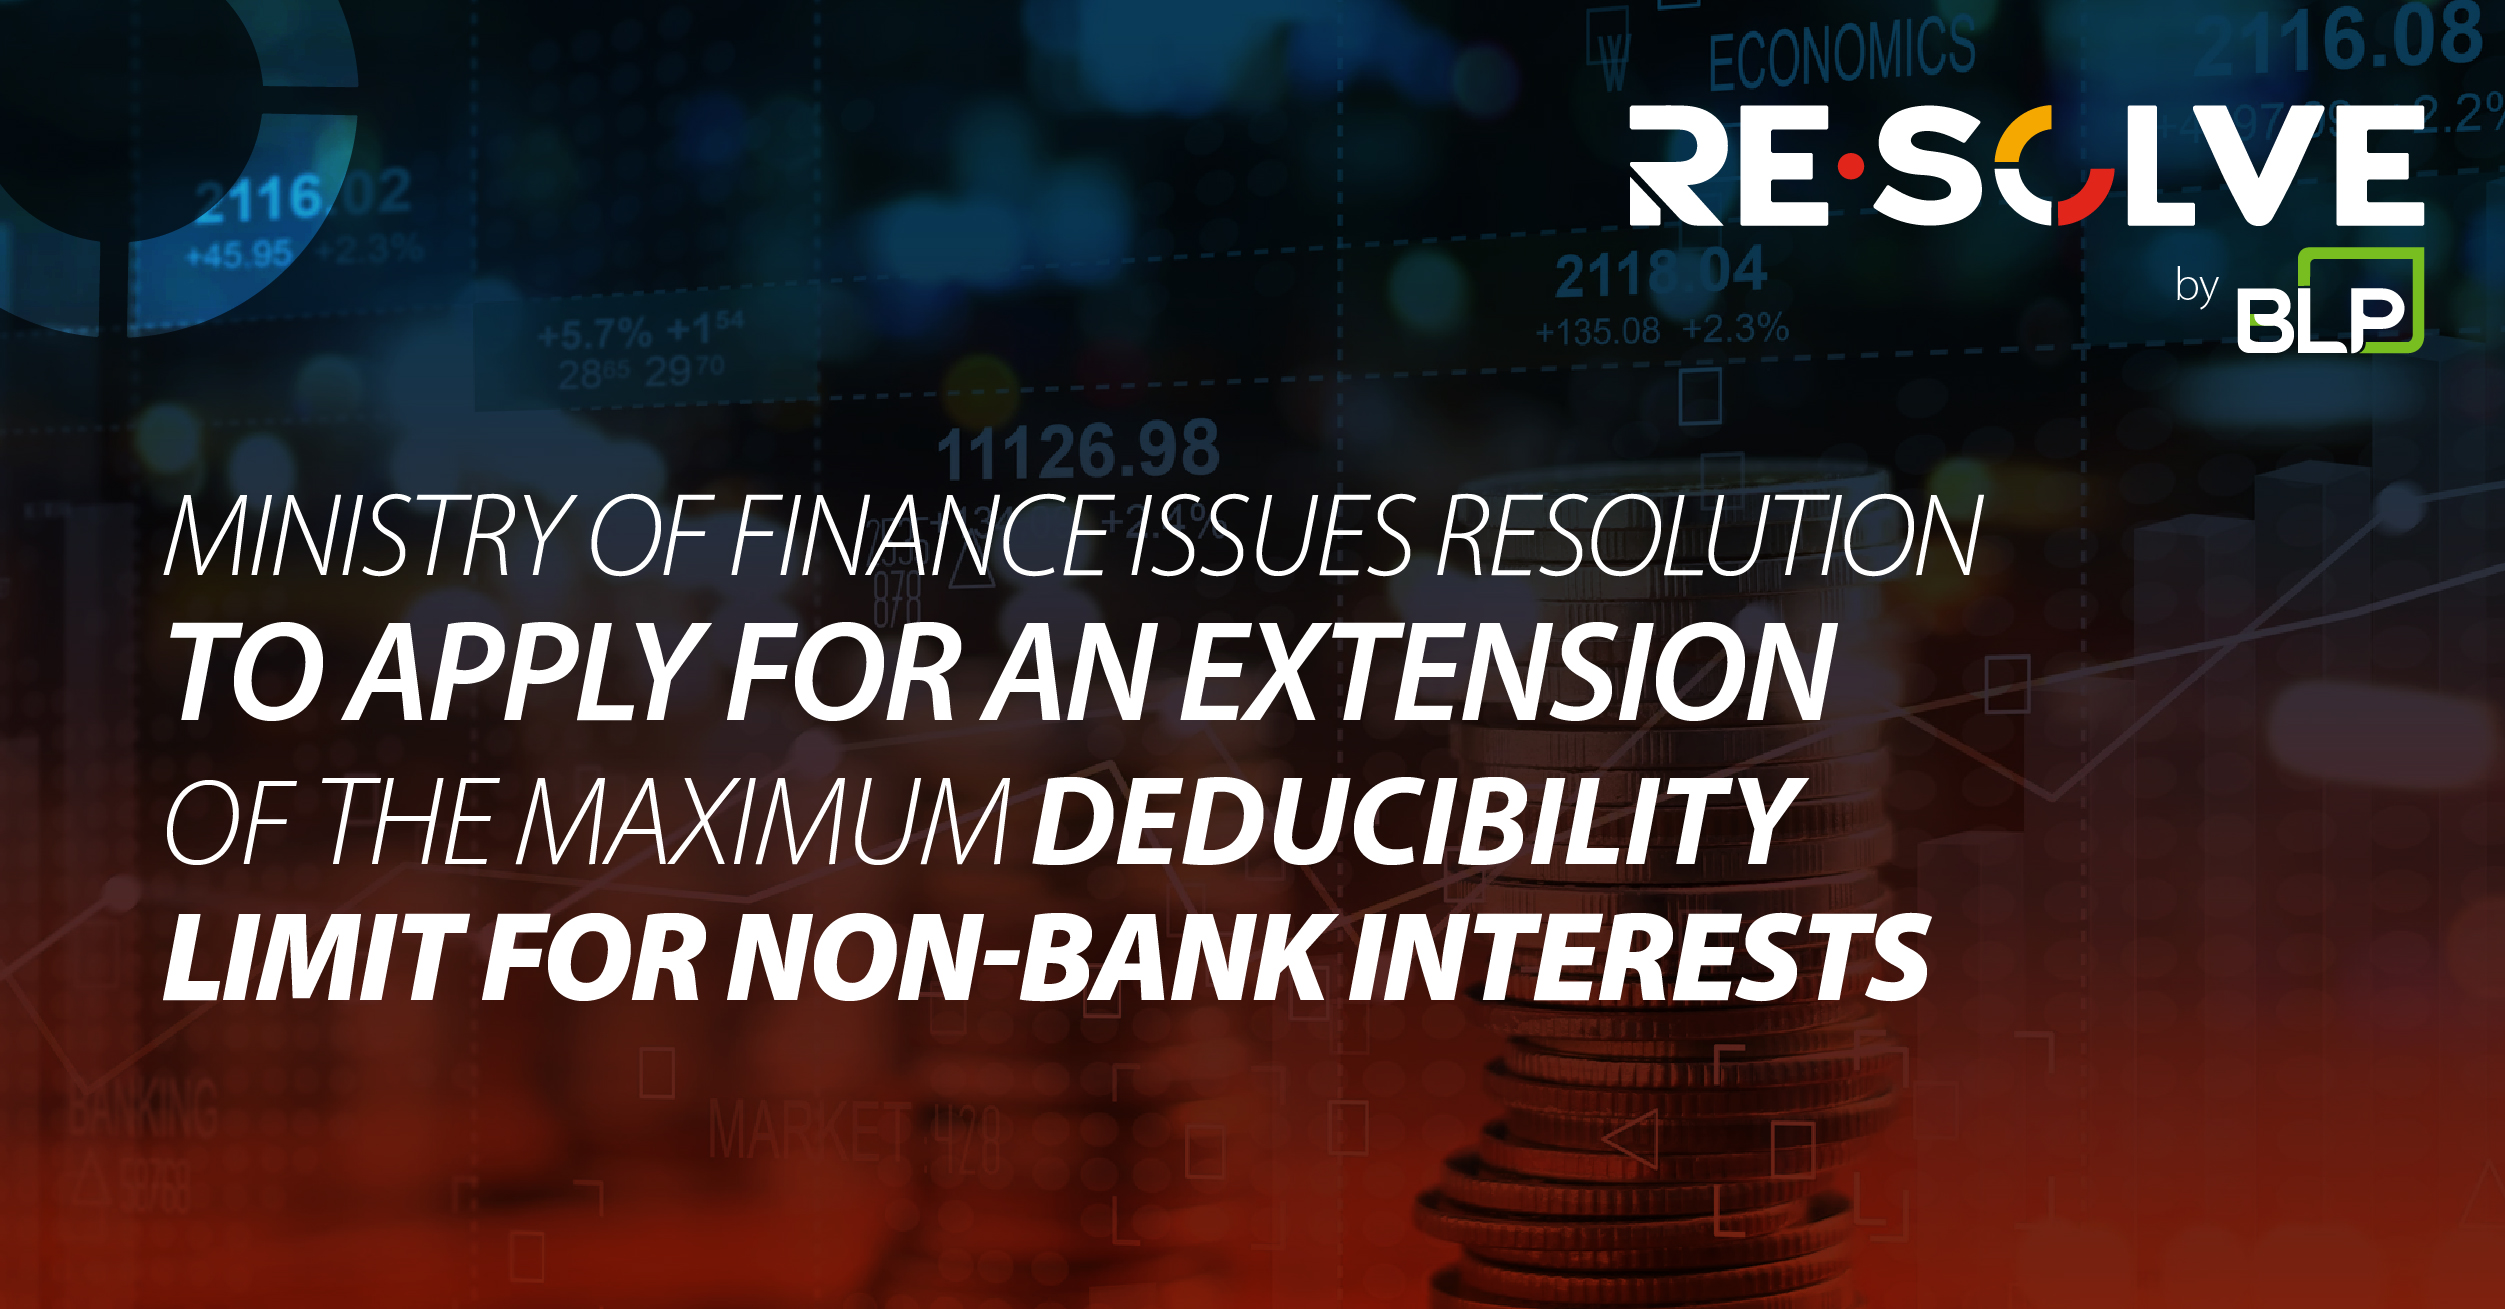 Ministry of Finance issues resolution to apply for an extension of the maximum deducibility limit for non-bank interest.